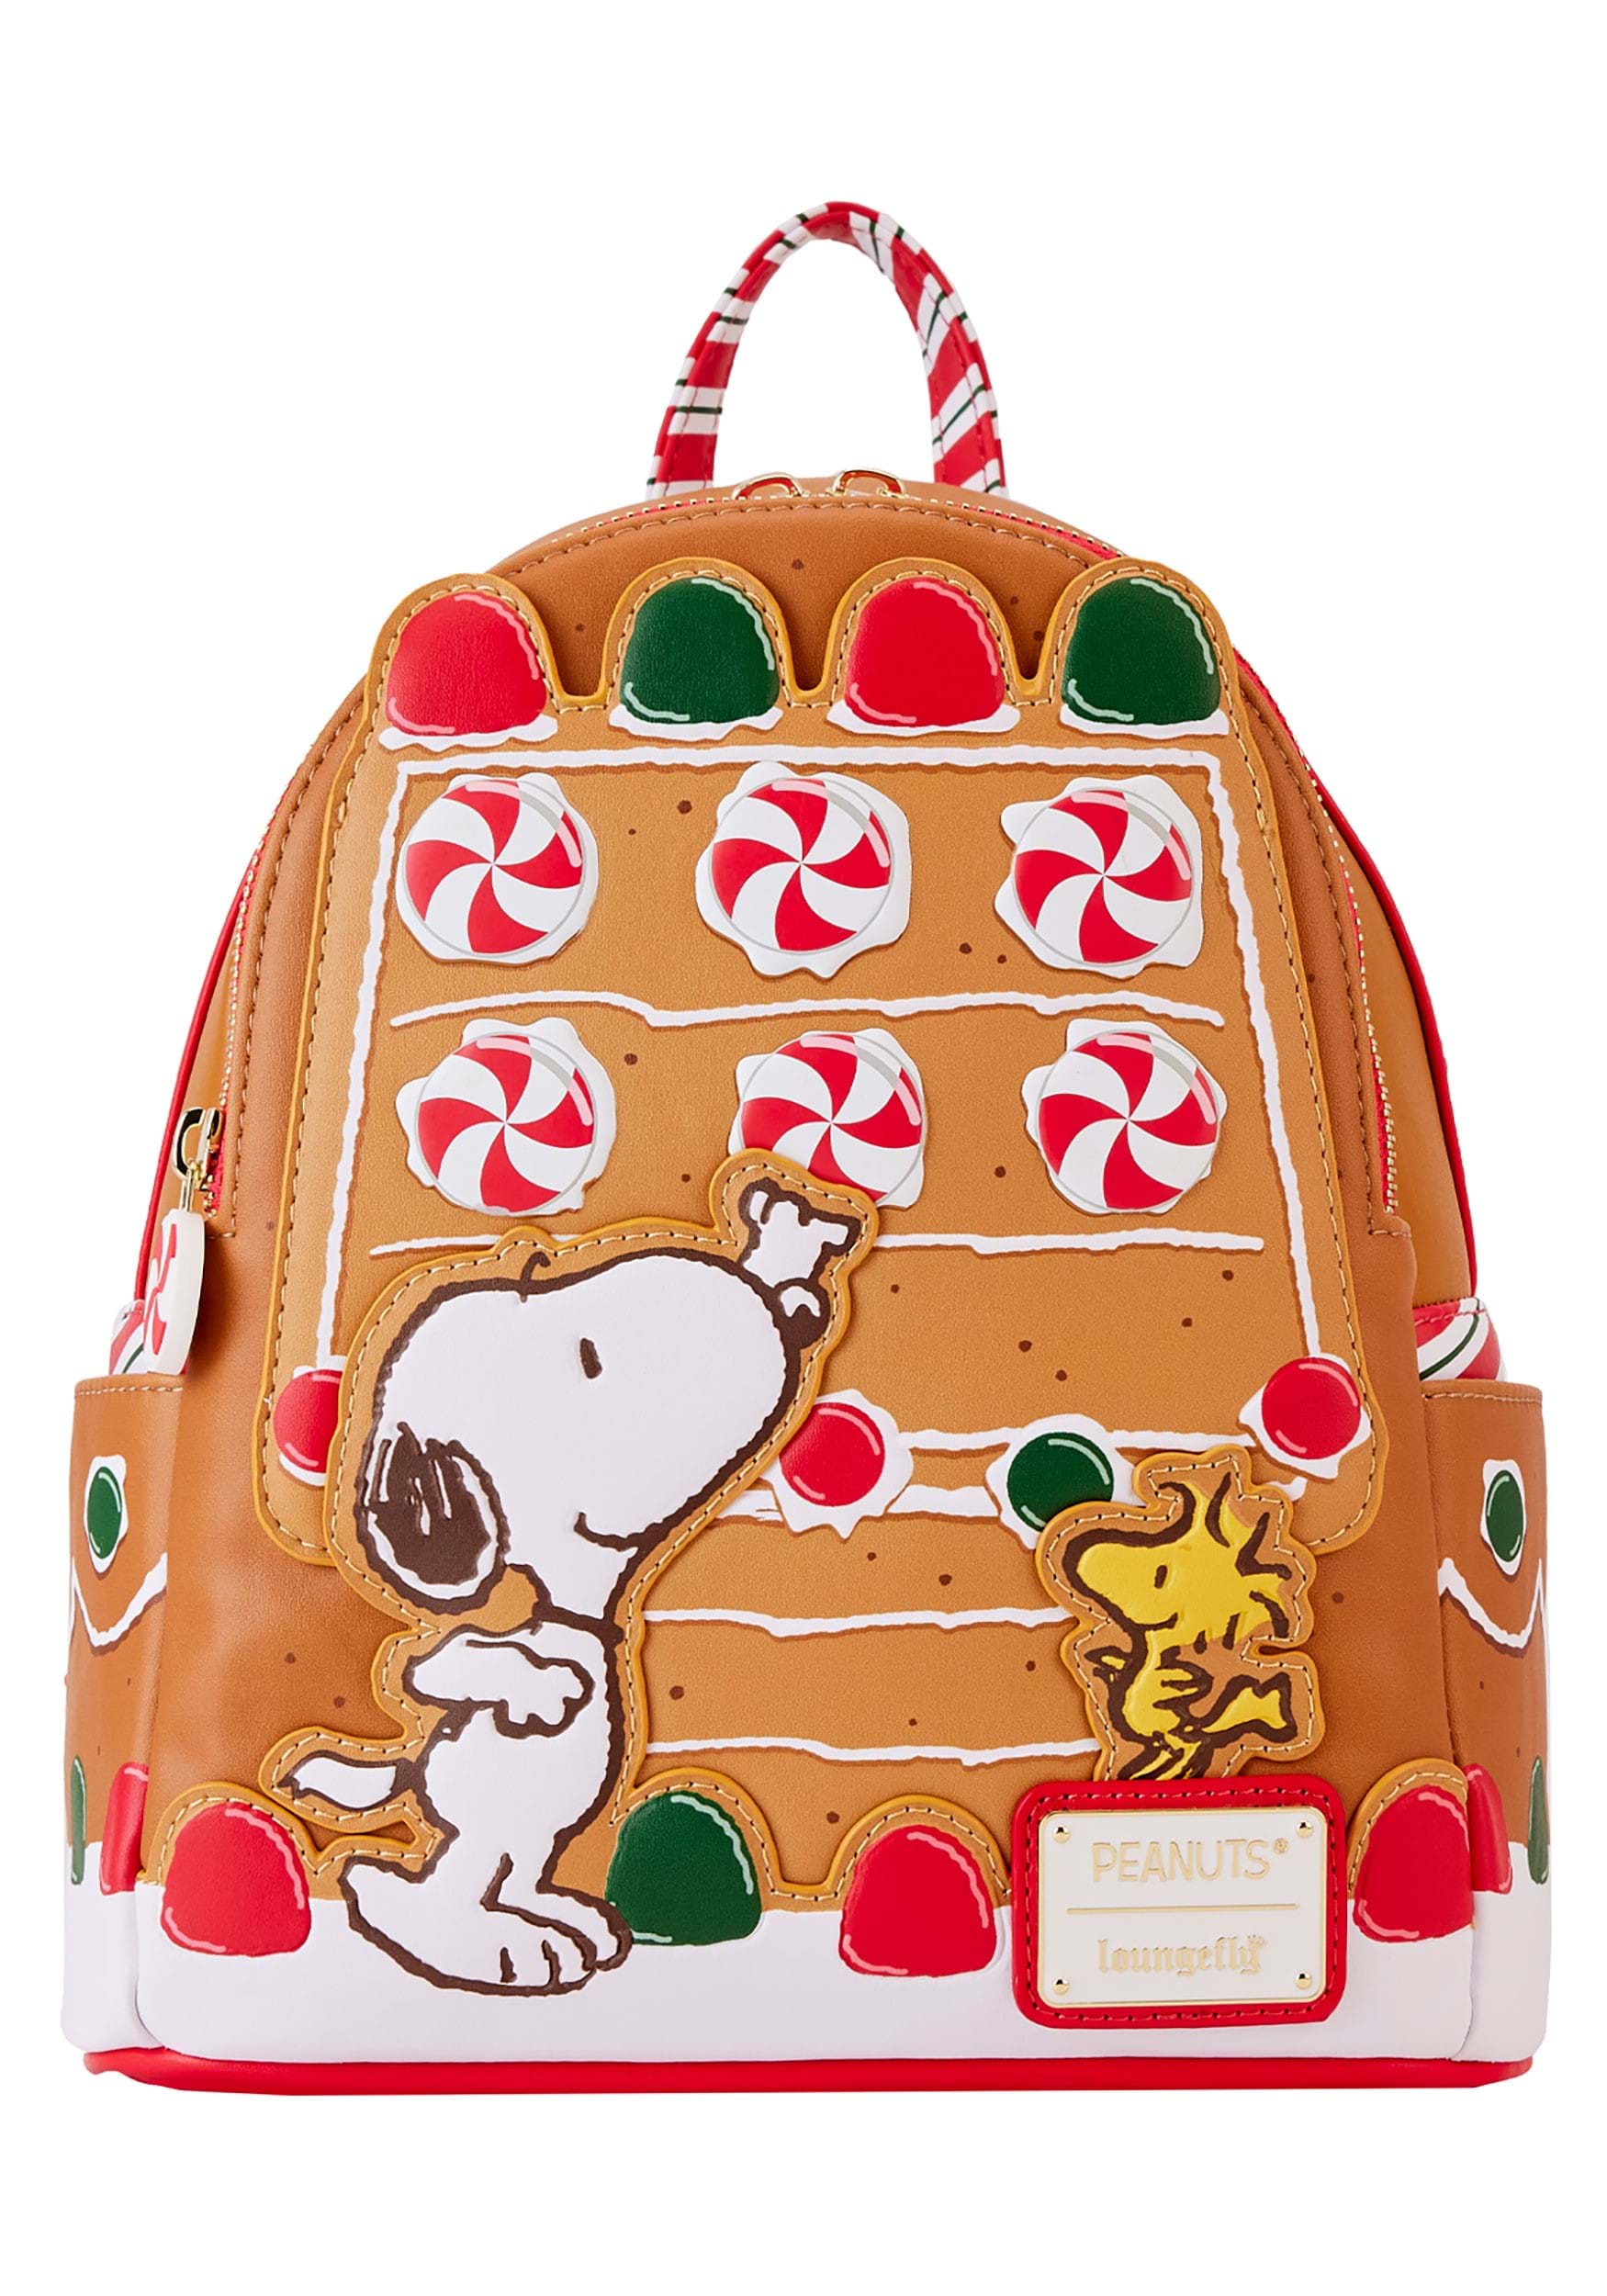 Image of Peanuts Snoopy Gingerbread House Loungefly Mini Backpack | Loungefly Peanuts ID LFPNBK0028-ST